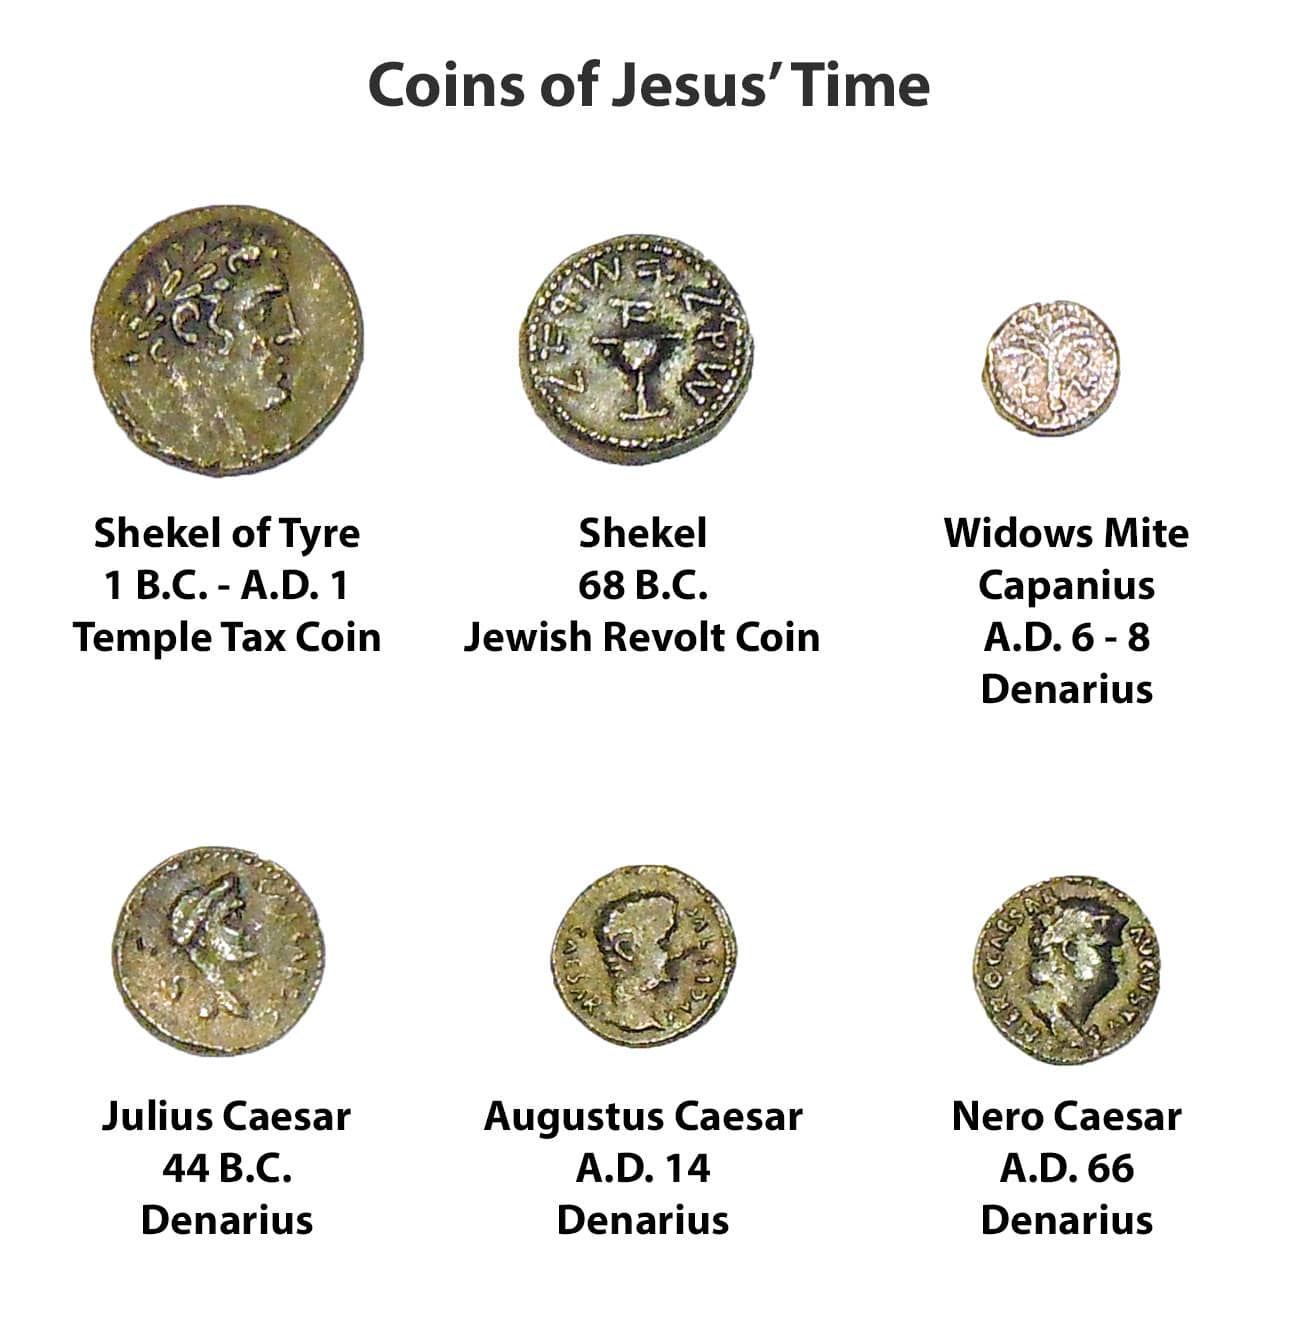 Coins of Christ's Time